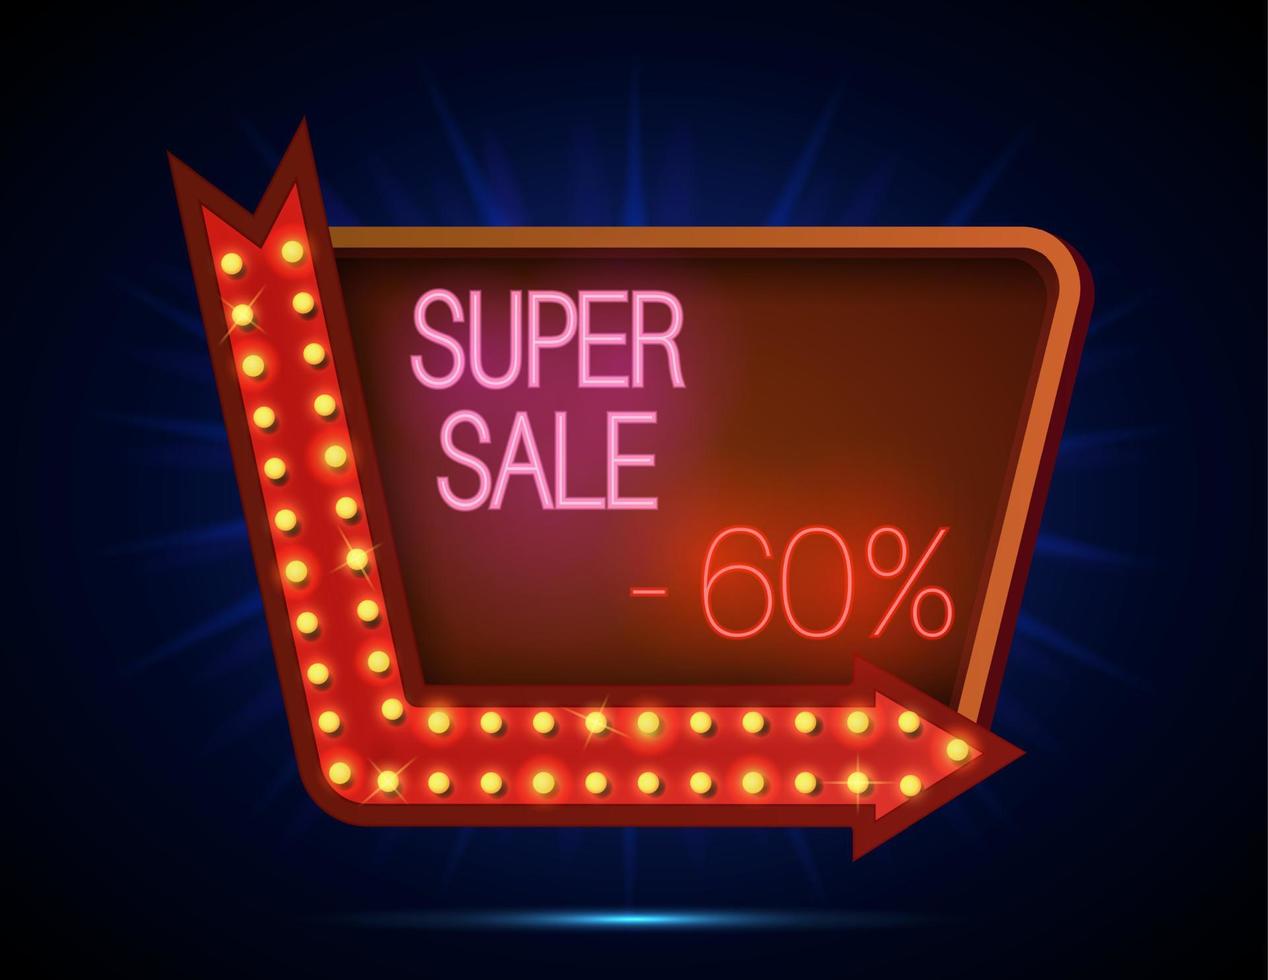 Discount signboard retro style with light frame vector